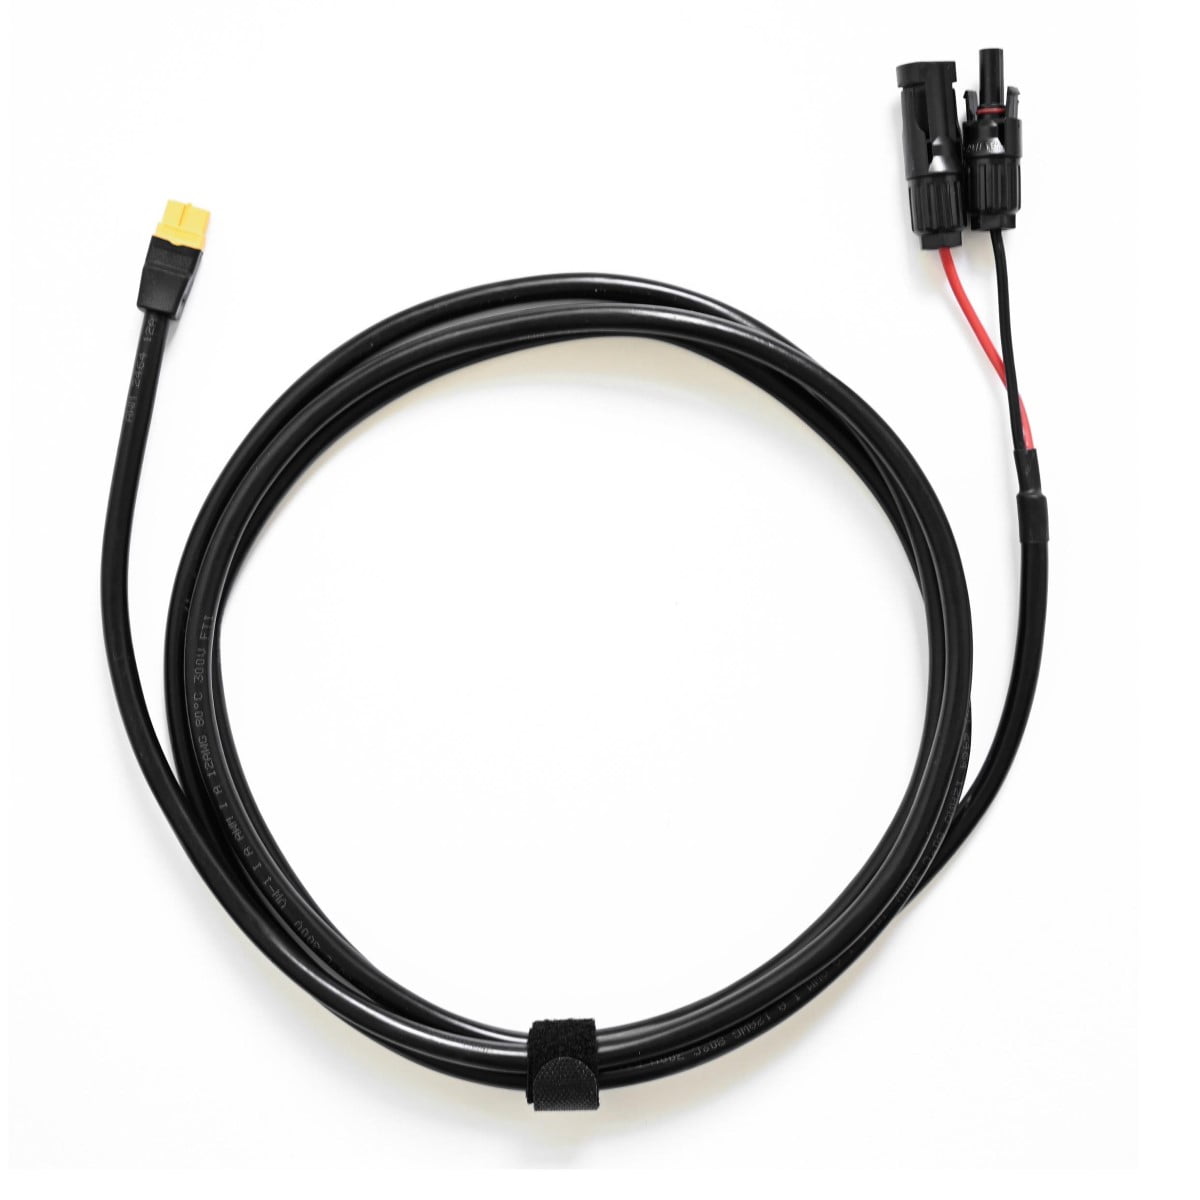 MC4 Compatible Connector to XT90 Cable – 3 Metres